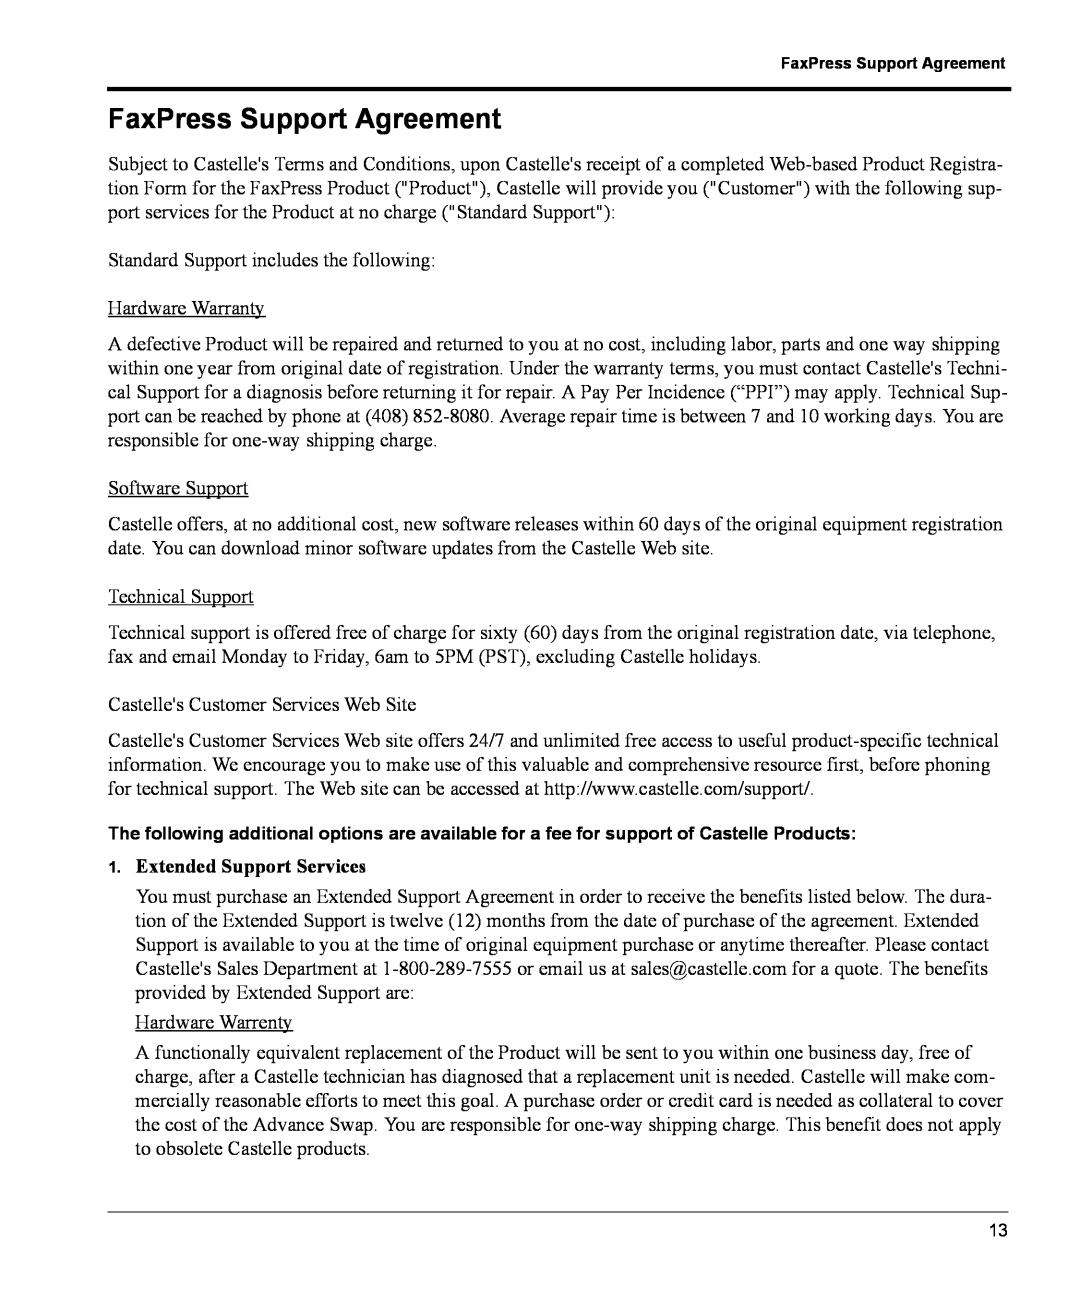 Castelle manual FaxPress Support Agreement, Extended Support Services 